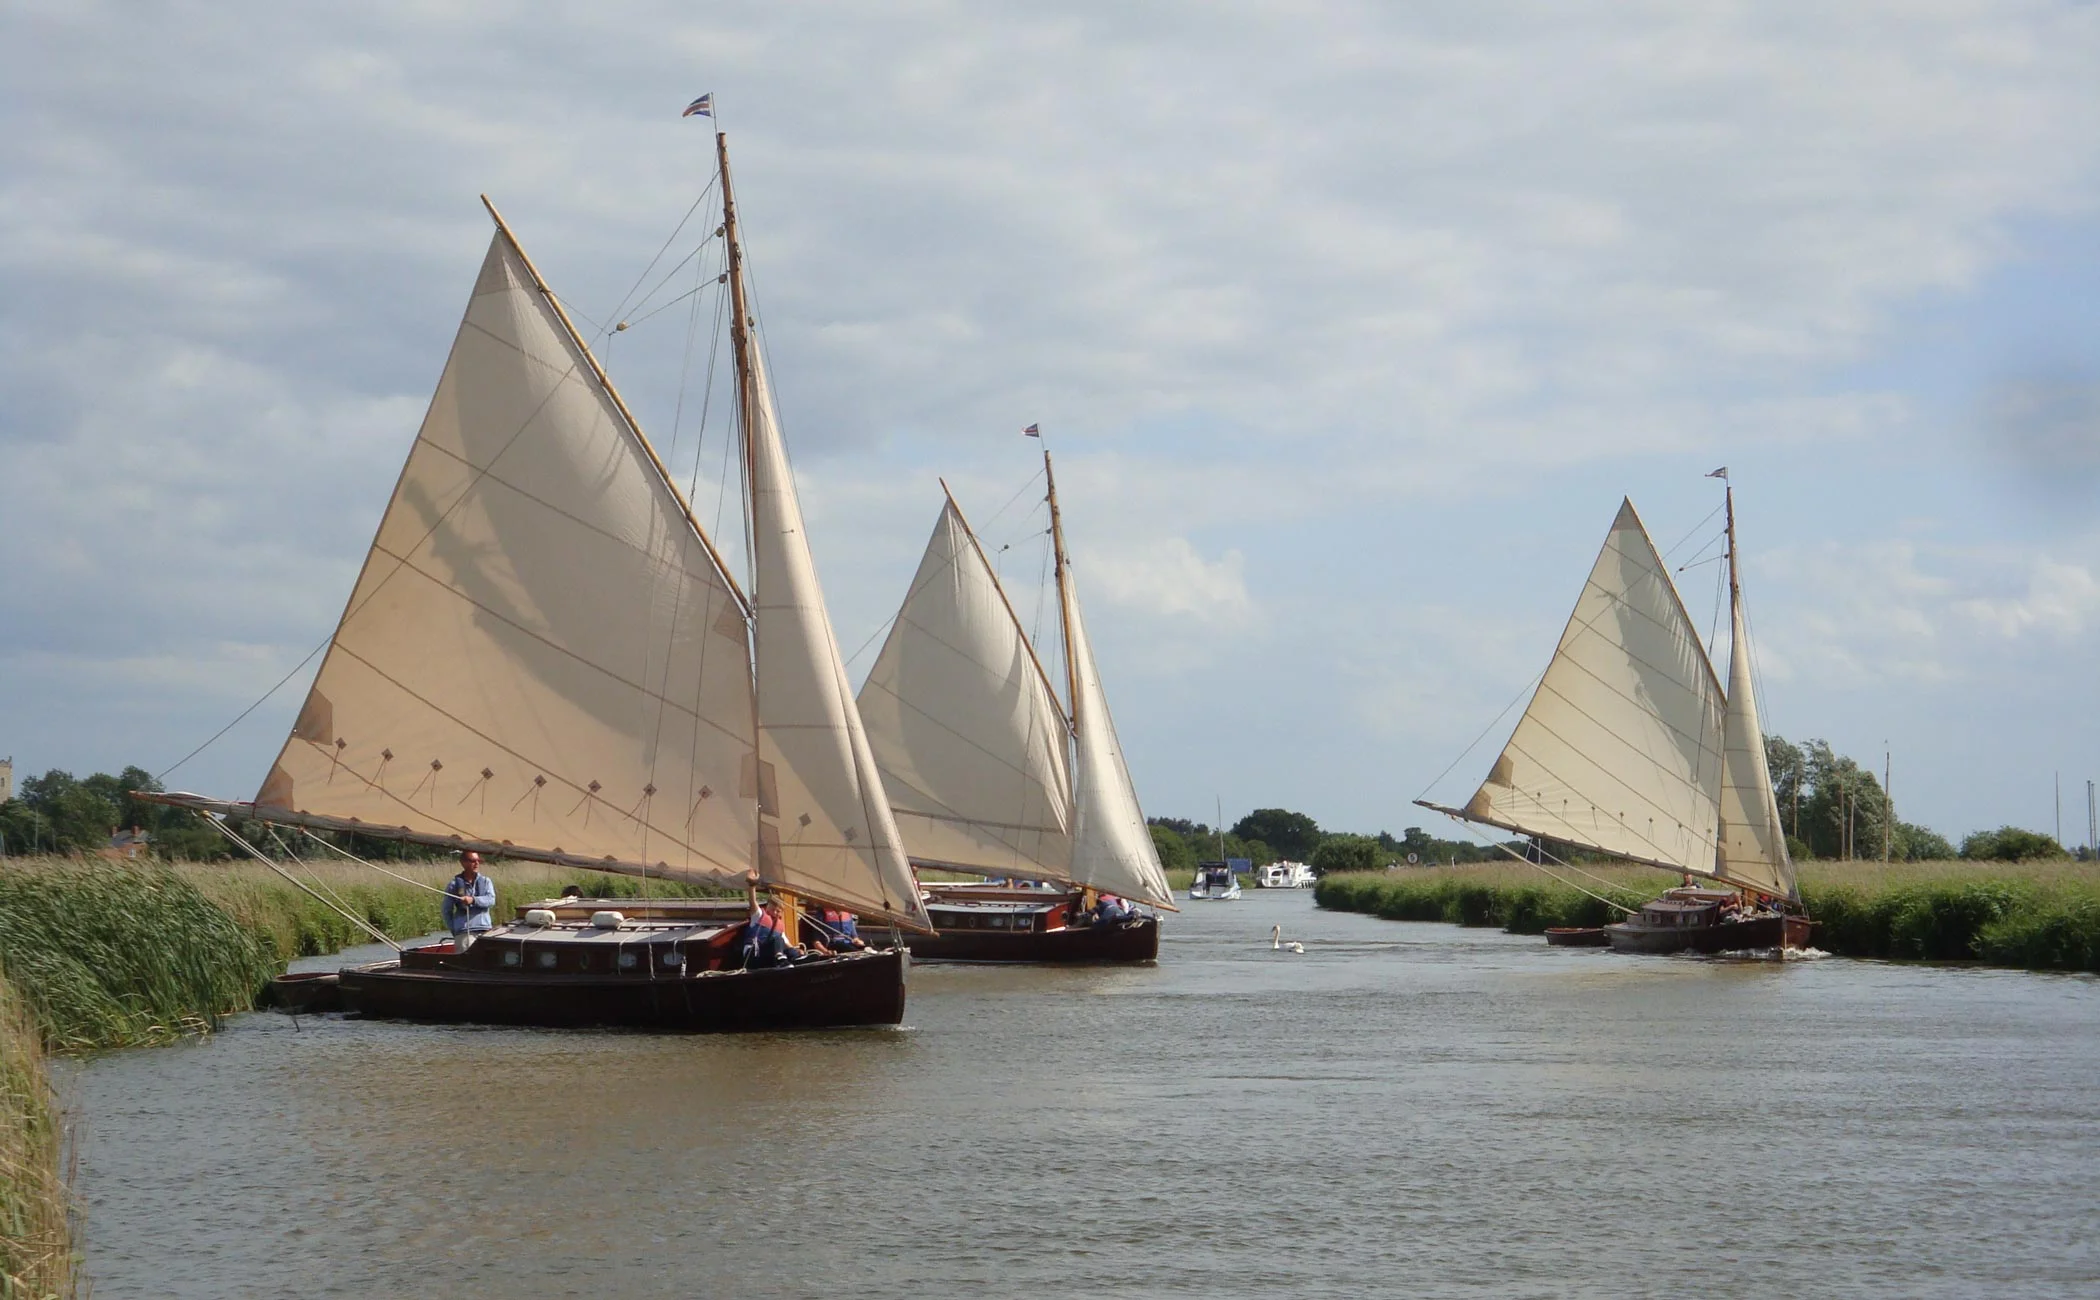 Three traditional wooden cabin yachts sailing on the Norfolk Broads